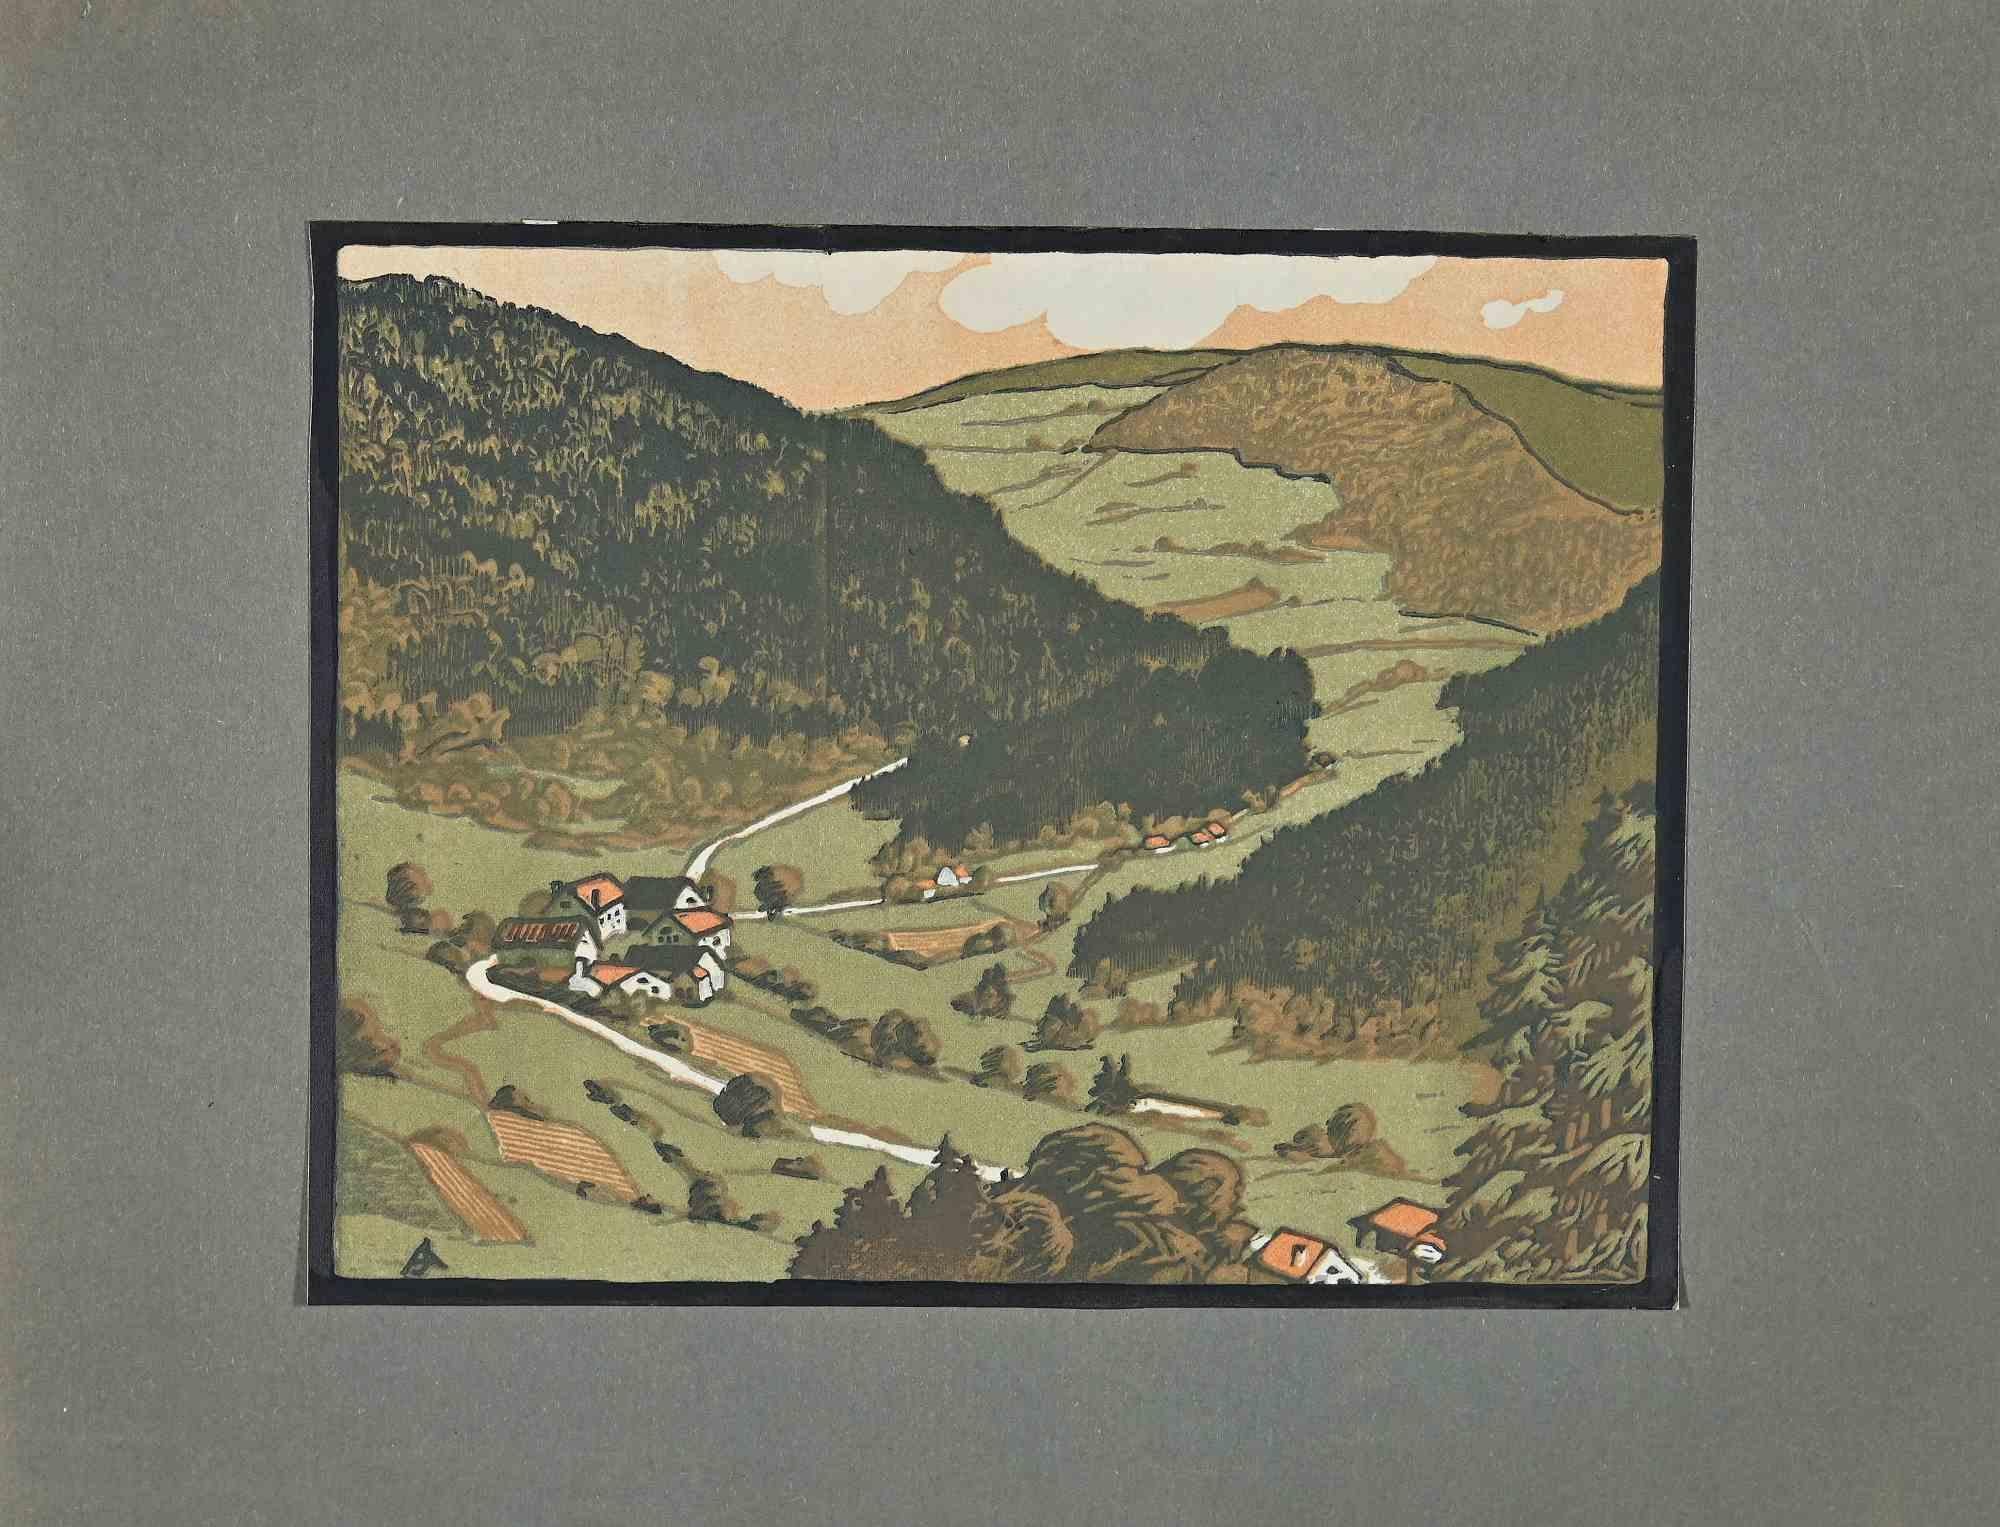 Landscape is an Original woodcut print realized by A. Jacquol in January 1934.

The beautiful artwork is in good condition included a green cardboard (25x32.7 cm).

Monogrammed on the lower left corner.

On the back another little artwork of the